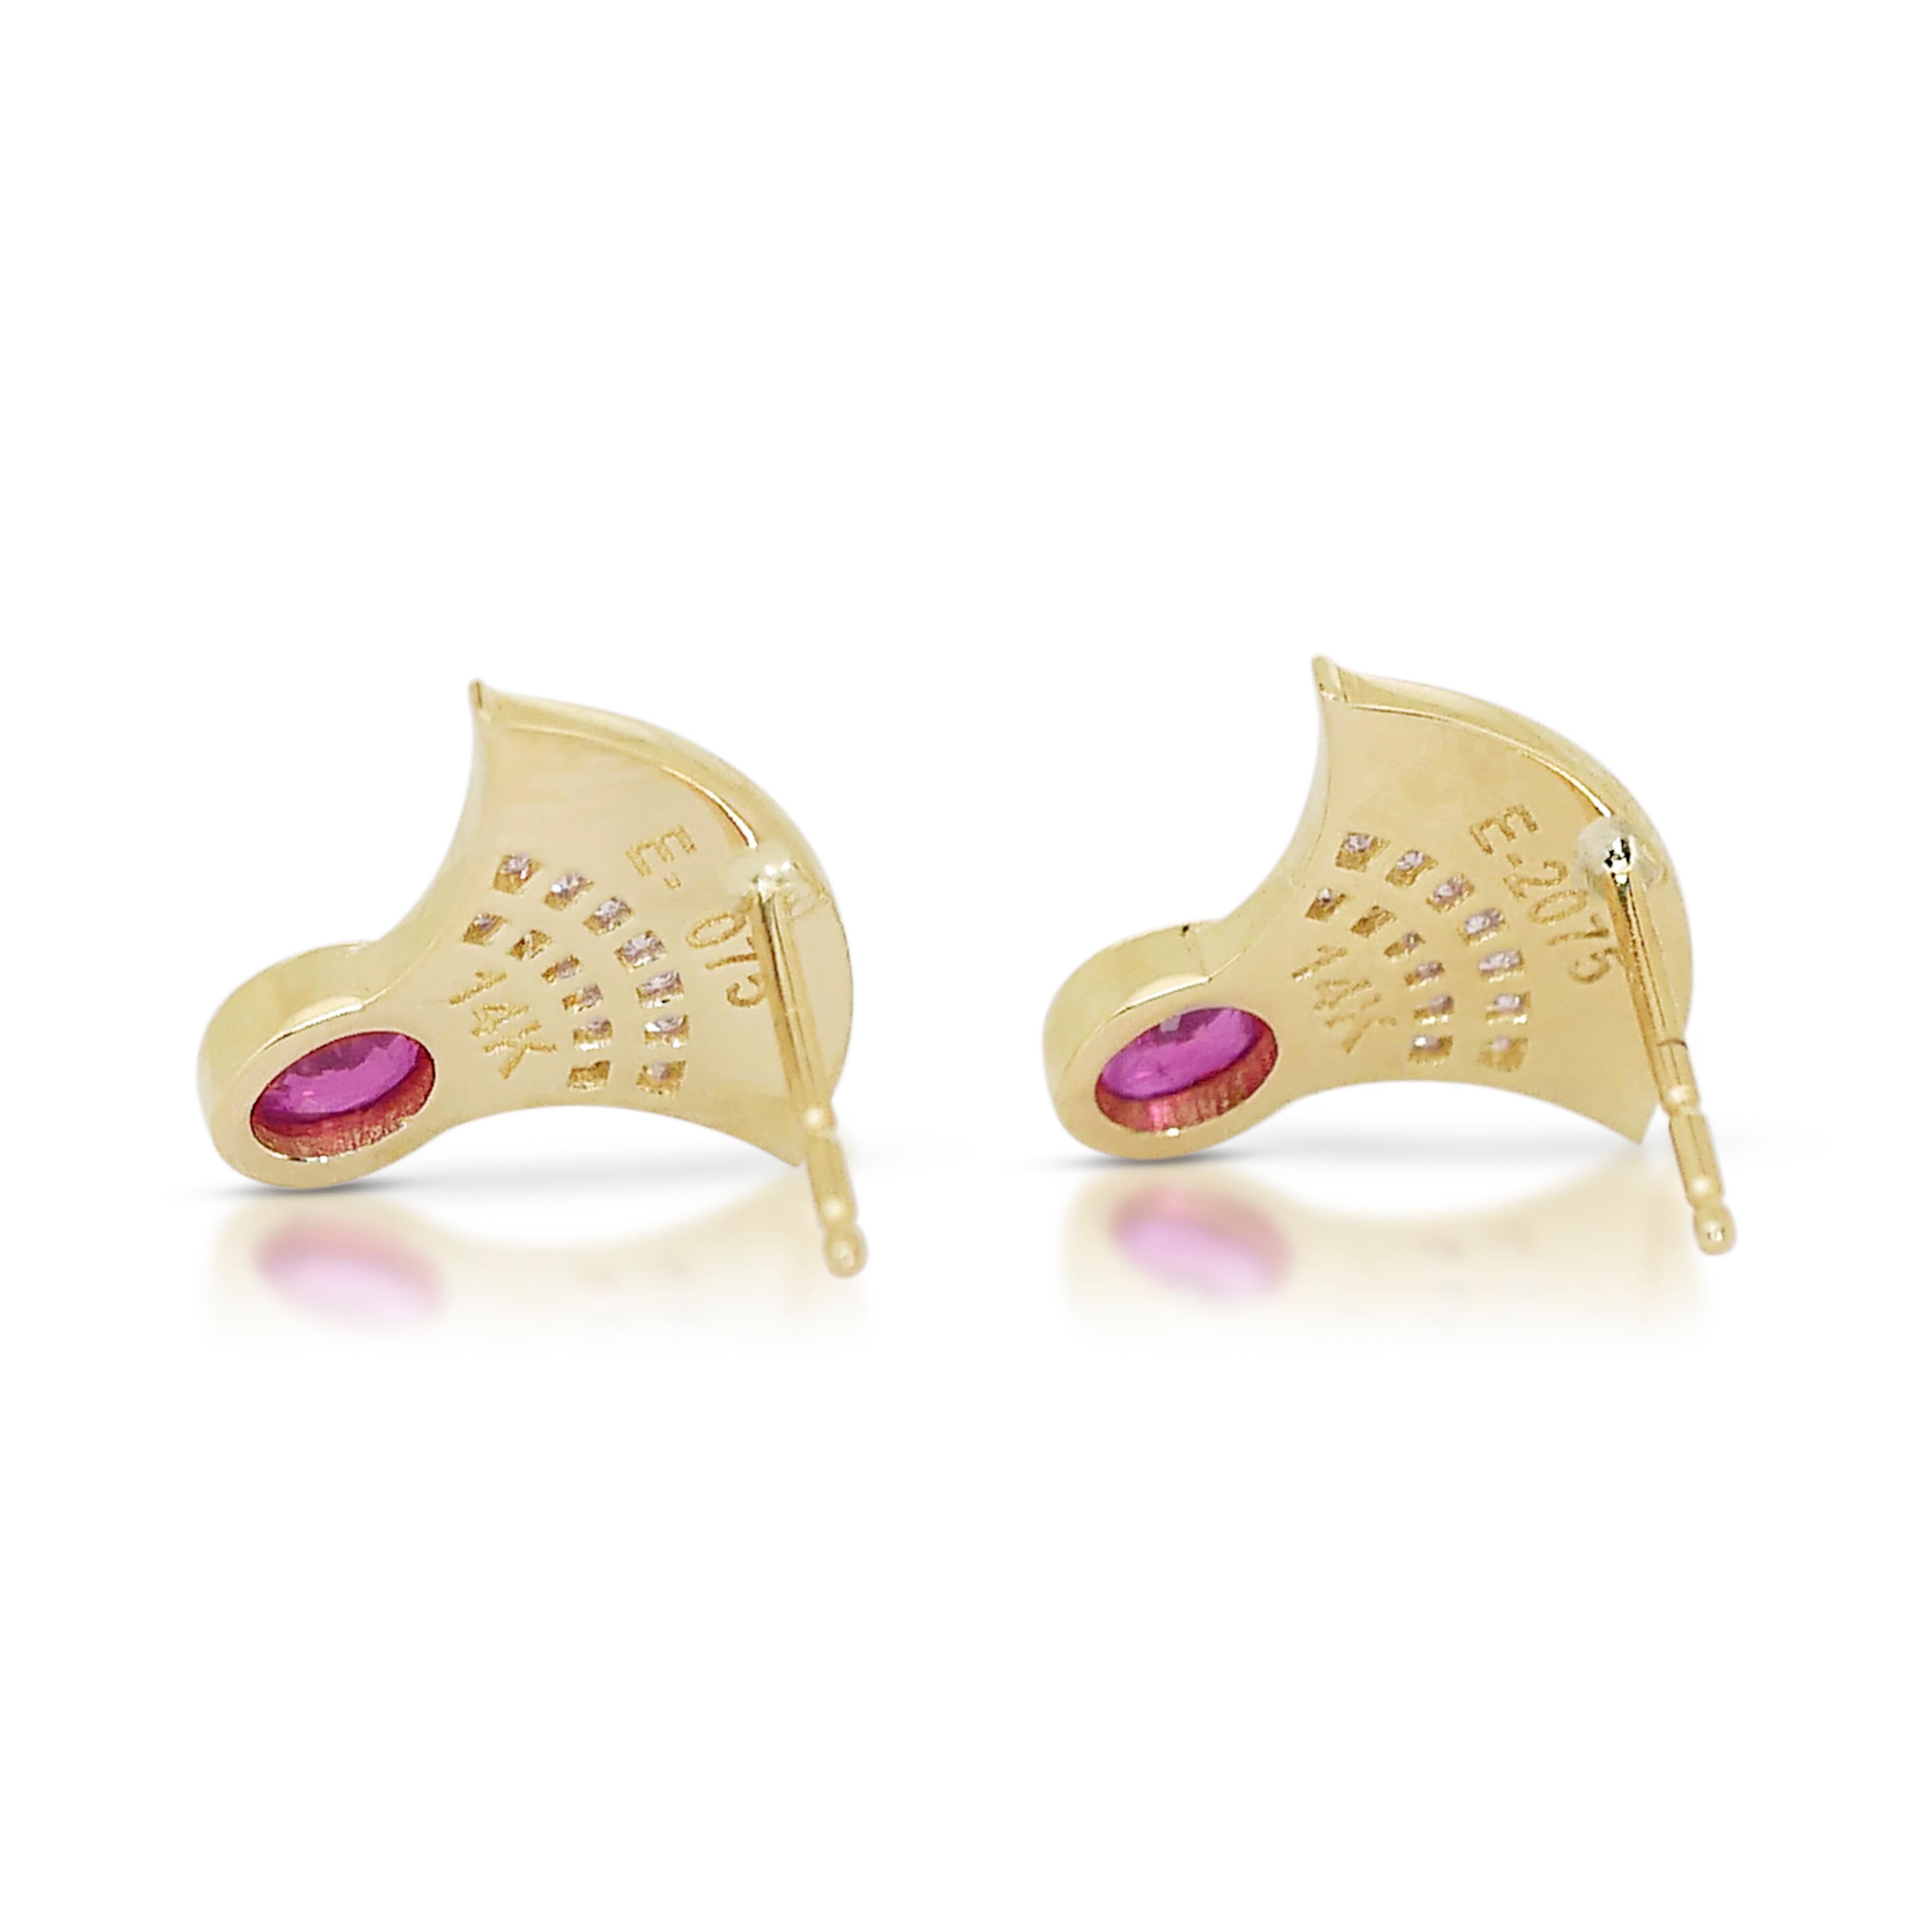 Stunning 0.75ct Rubies and Diamonds Stud Earrings in 14k Yellow Gold - AIG  For Sale 2